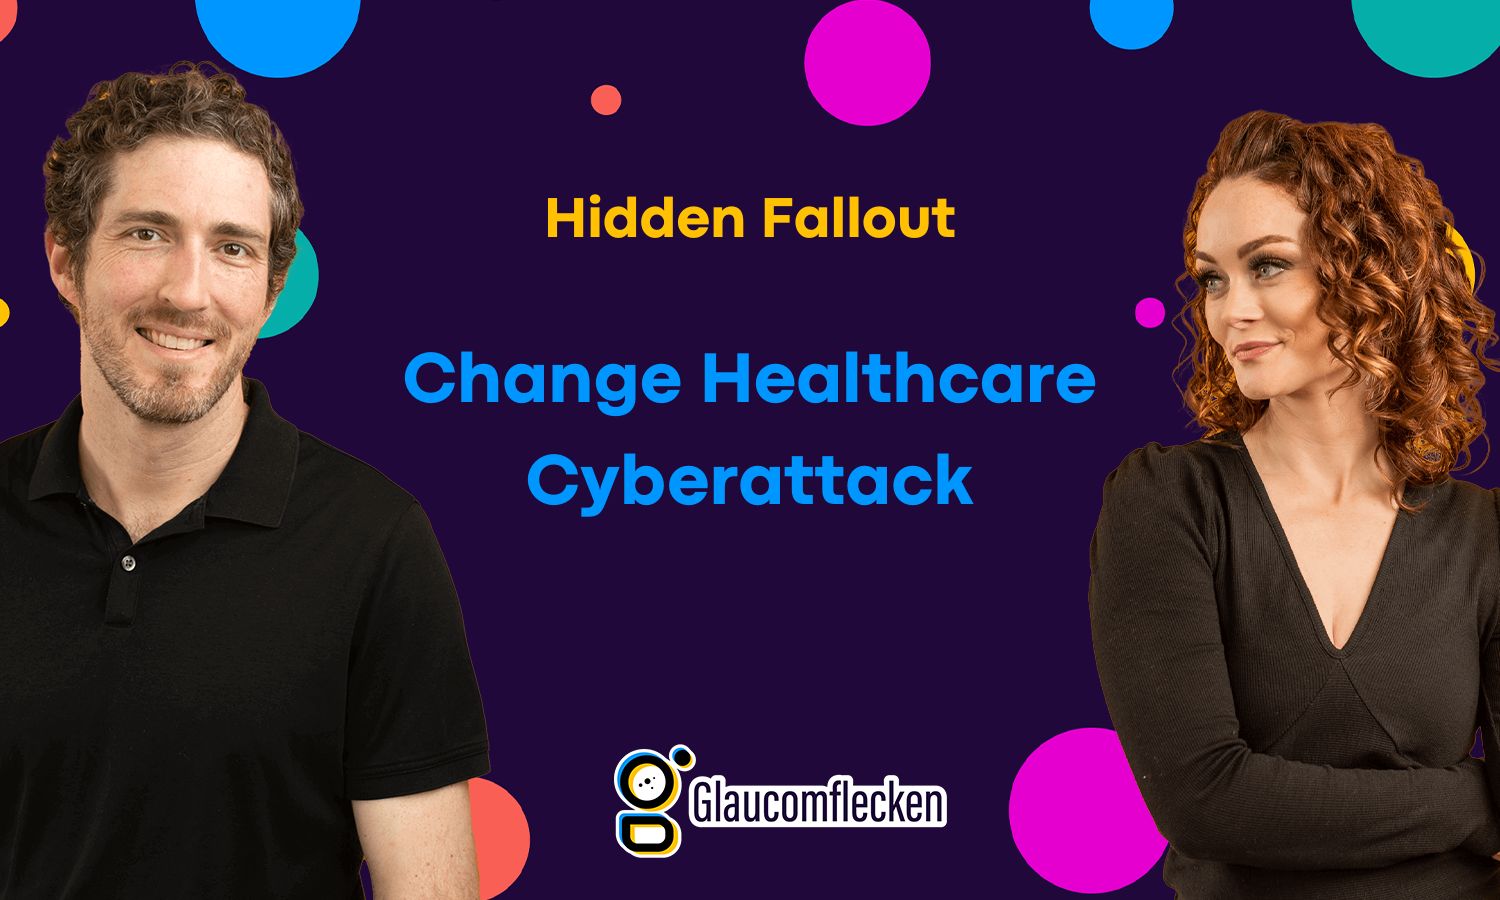 Change Healthcare Cyberattack